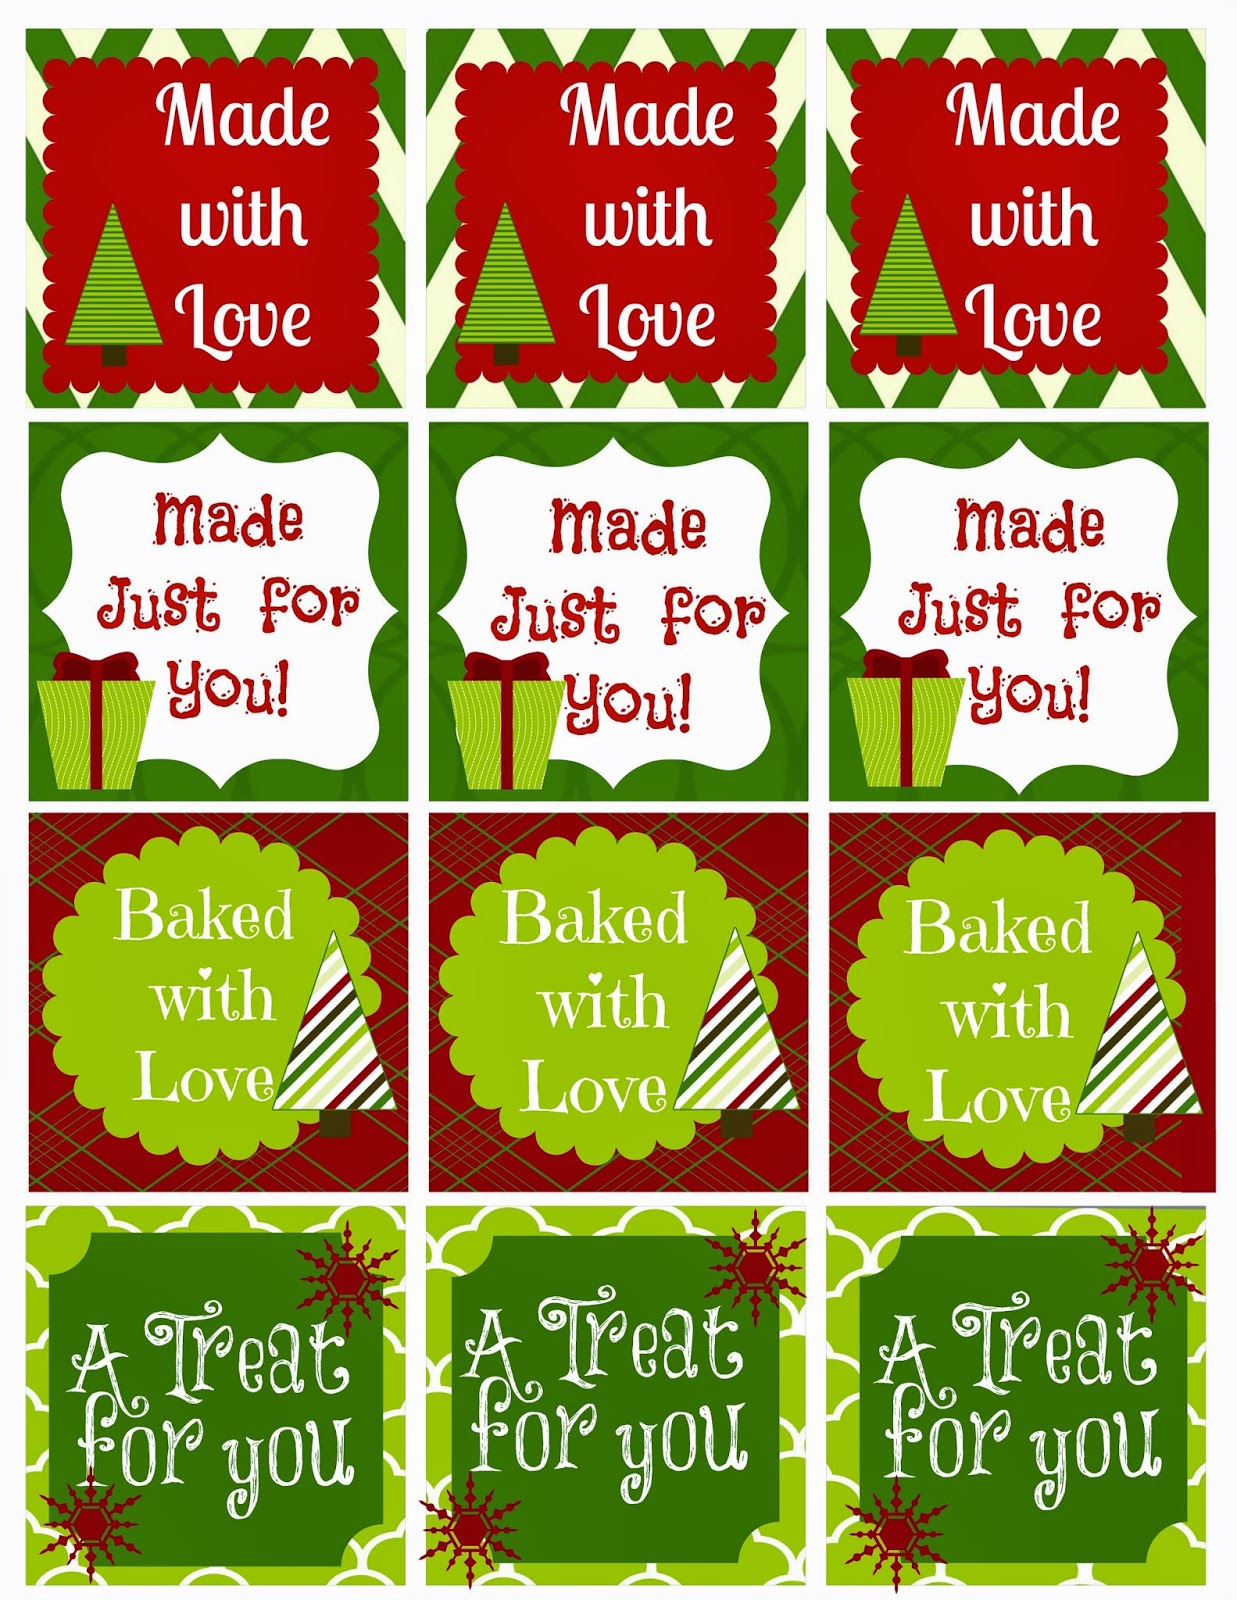 Barb Camp - Made with Love Gift Tags- For all those handmade gifts you make